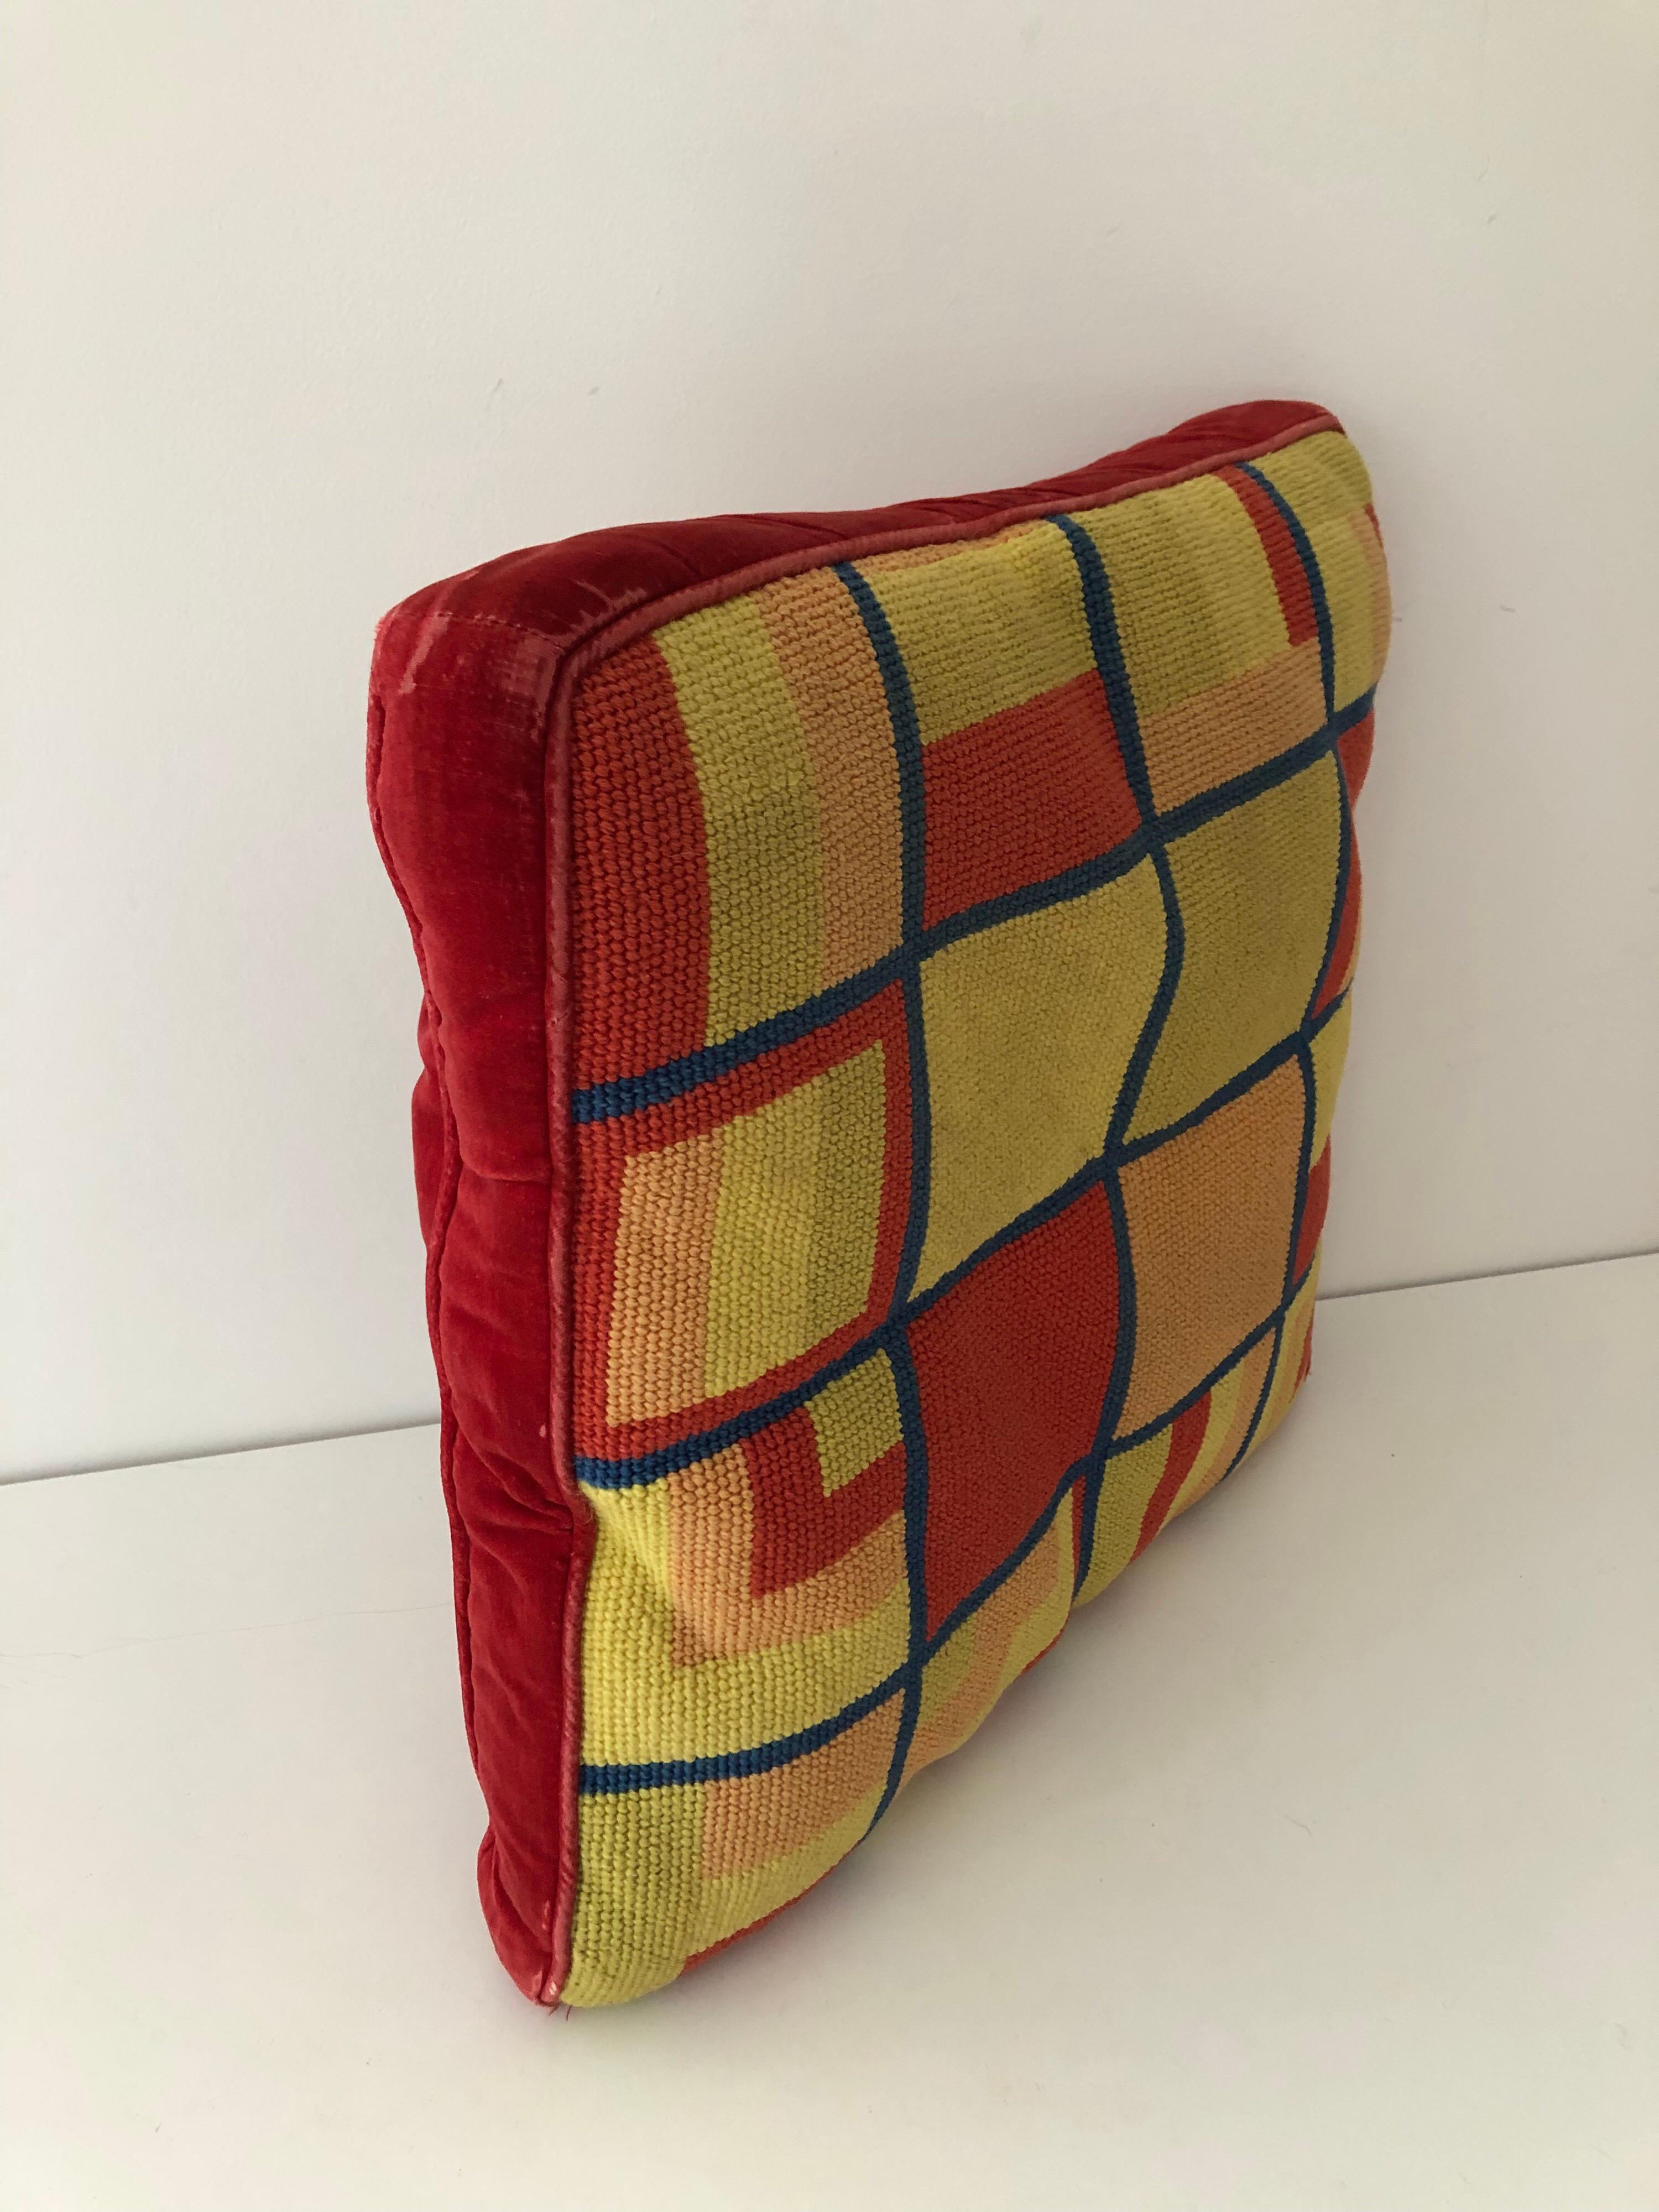 A handmade midcentury Mondrian inspired needlepoint pillow with red velvet back. Tones of red, cyon, mustard, and yellow. Two associated pillows also available.